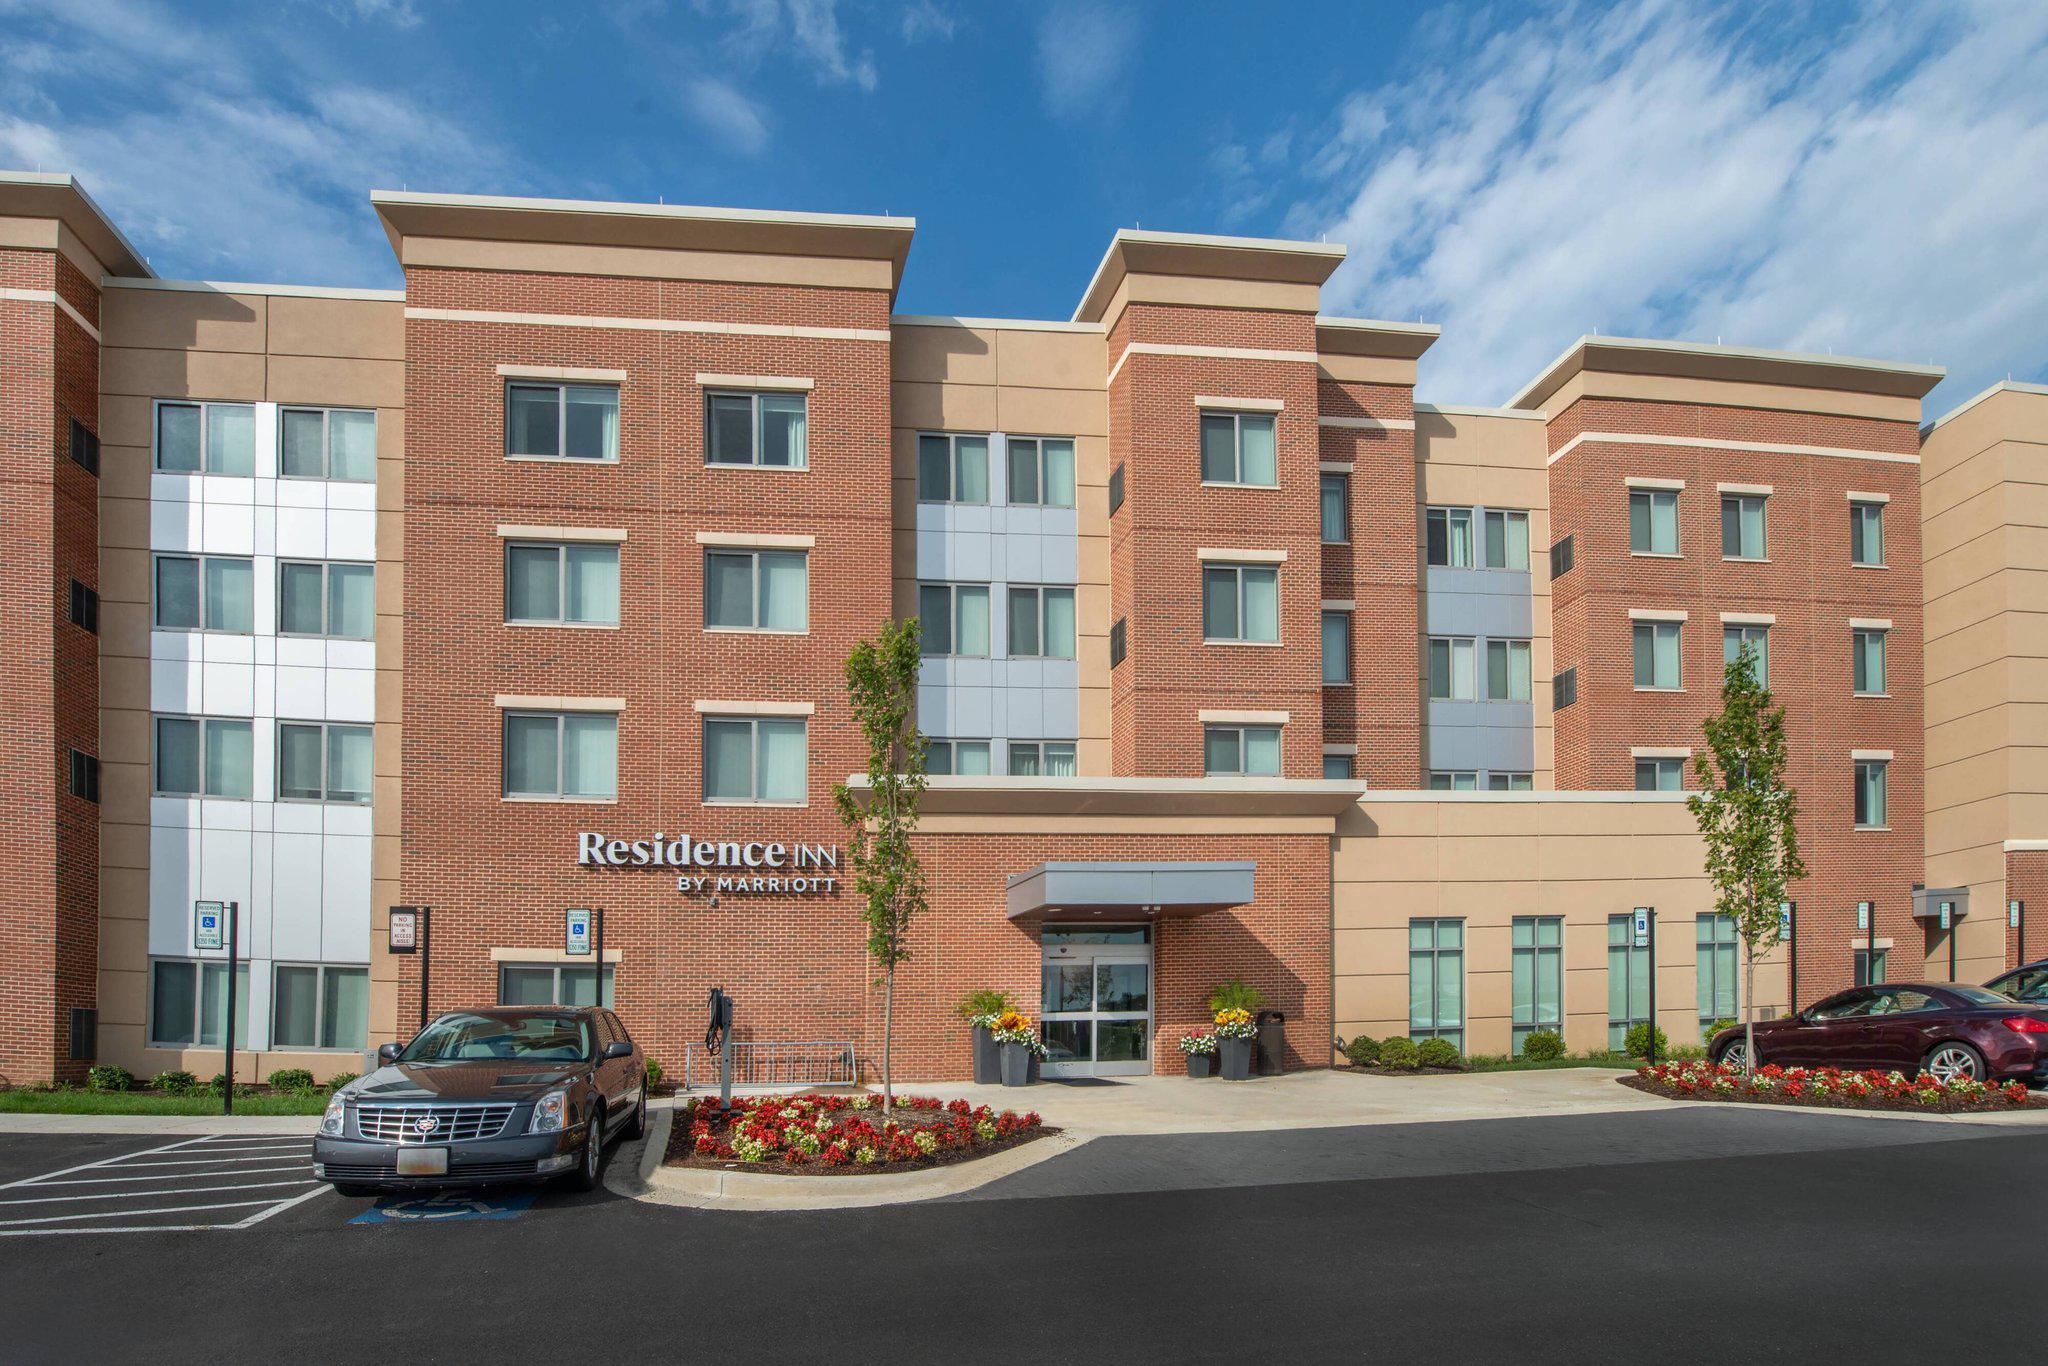 Residence Inn by Marriott Fulton at Maple Lawn Photo